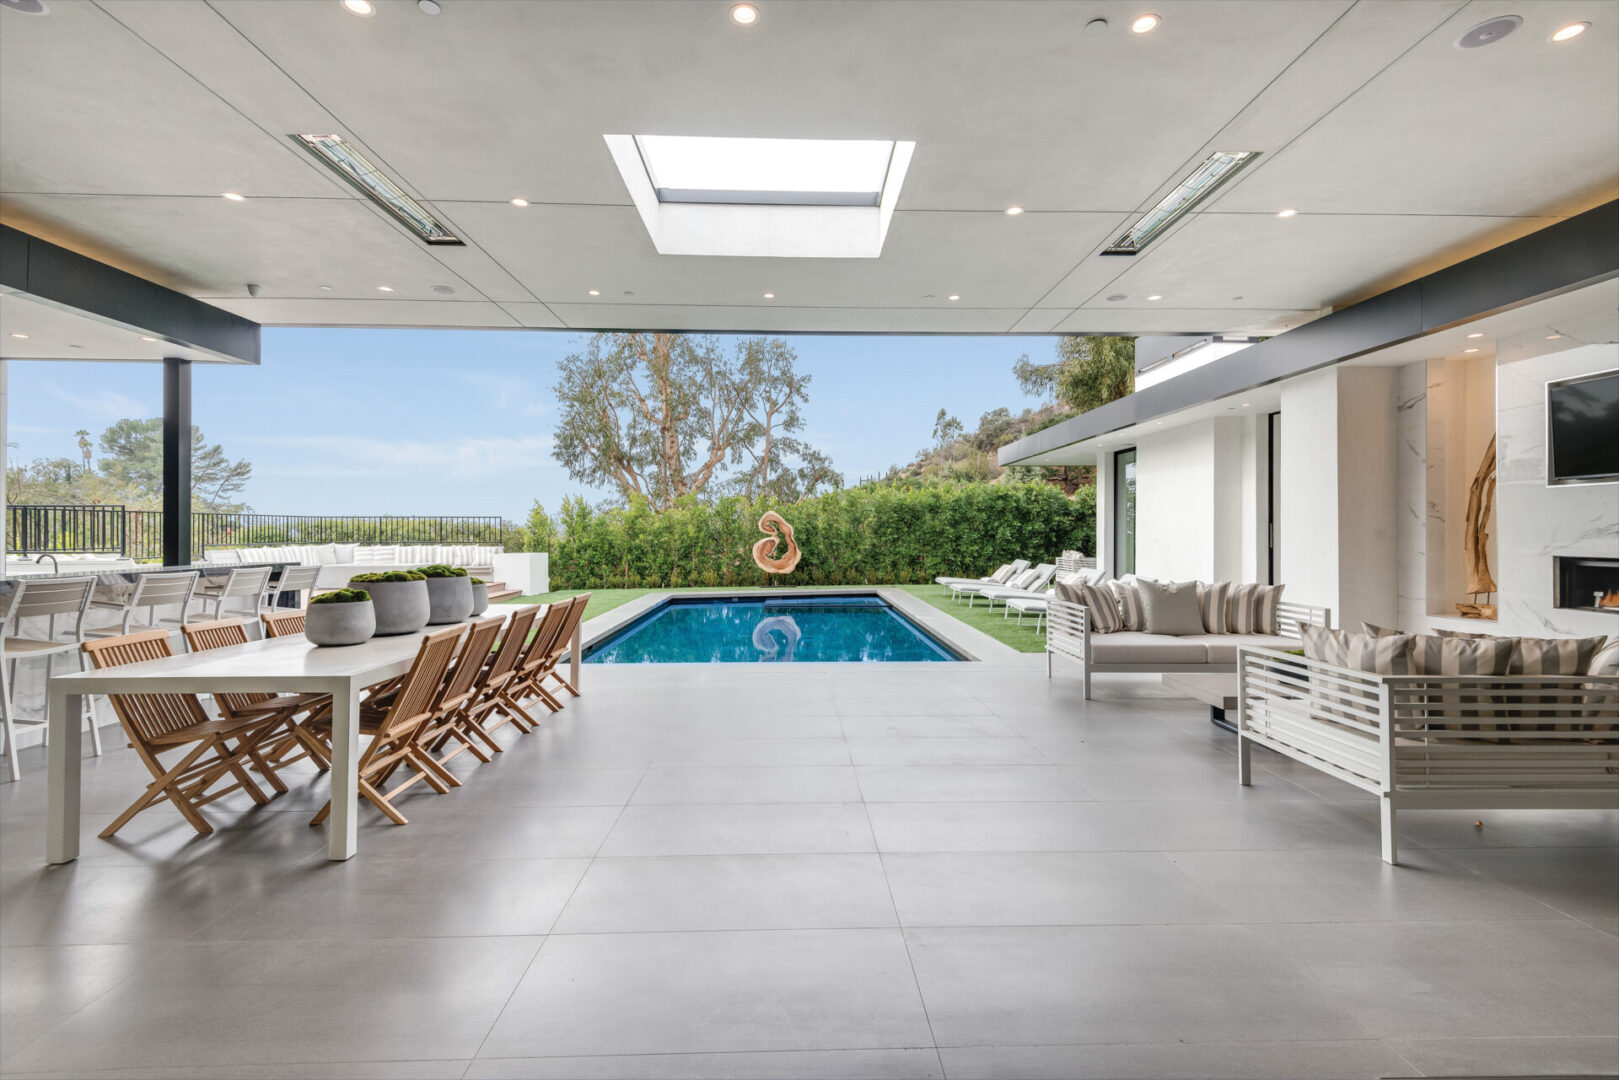 A large open patio with a pool and outdoor furniture.